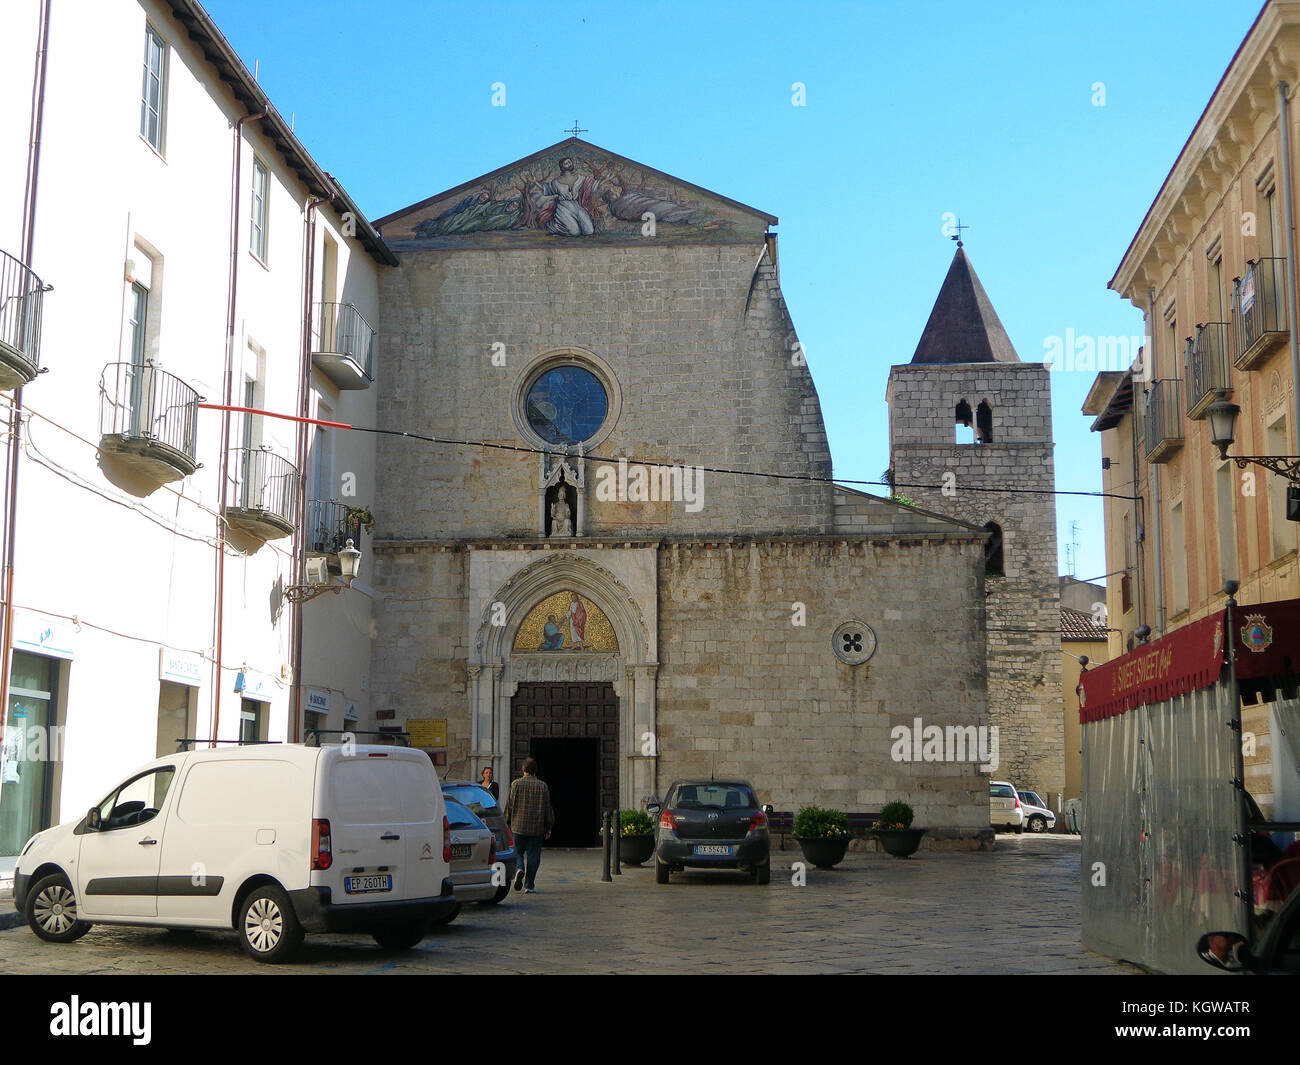 Fondi, Italy - 10 june 2013: Saint Peter's Apostle Parish. Fondi's urban core is located in the south pontino halfway between Rome and Naples. Stock Photo